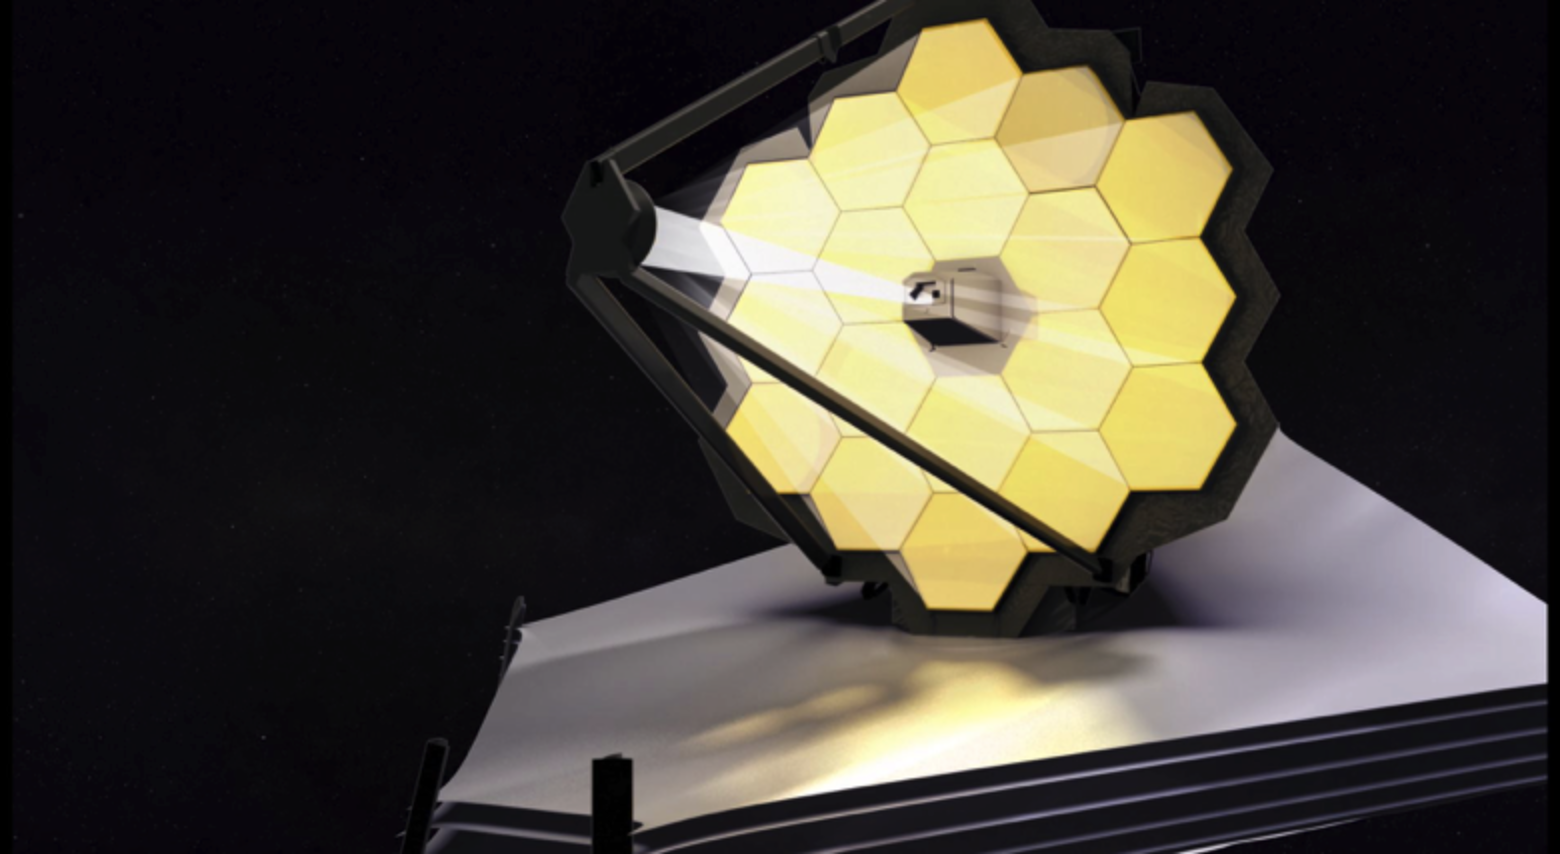 After launch, NASA’s James Webb Space Telescope will use a process called wavefront sensing and control to perfect its vision in orbit. This animation illustrates that process.